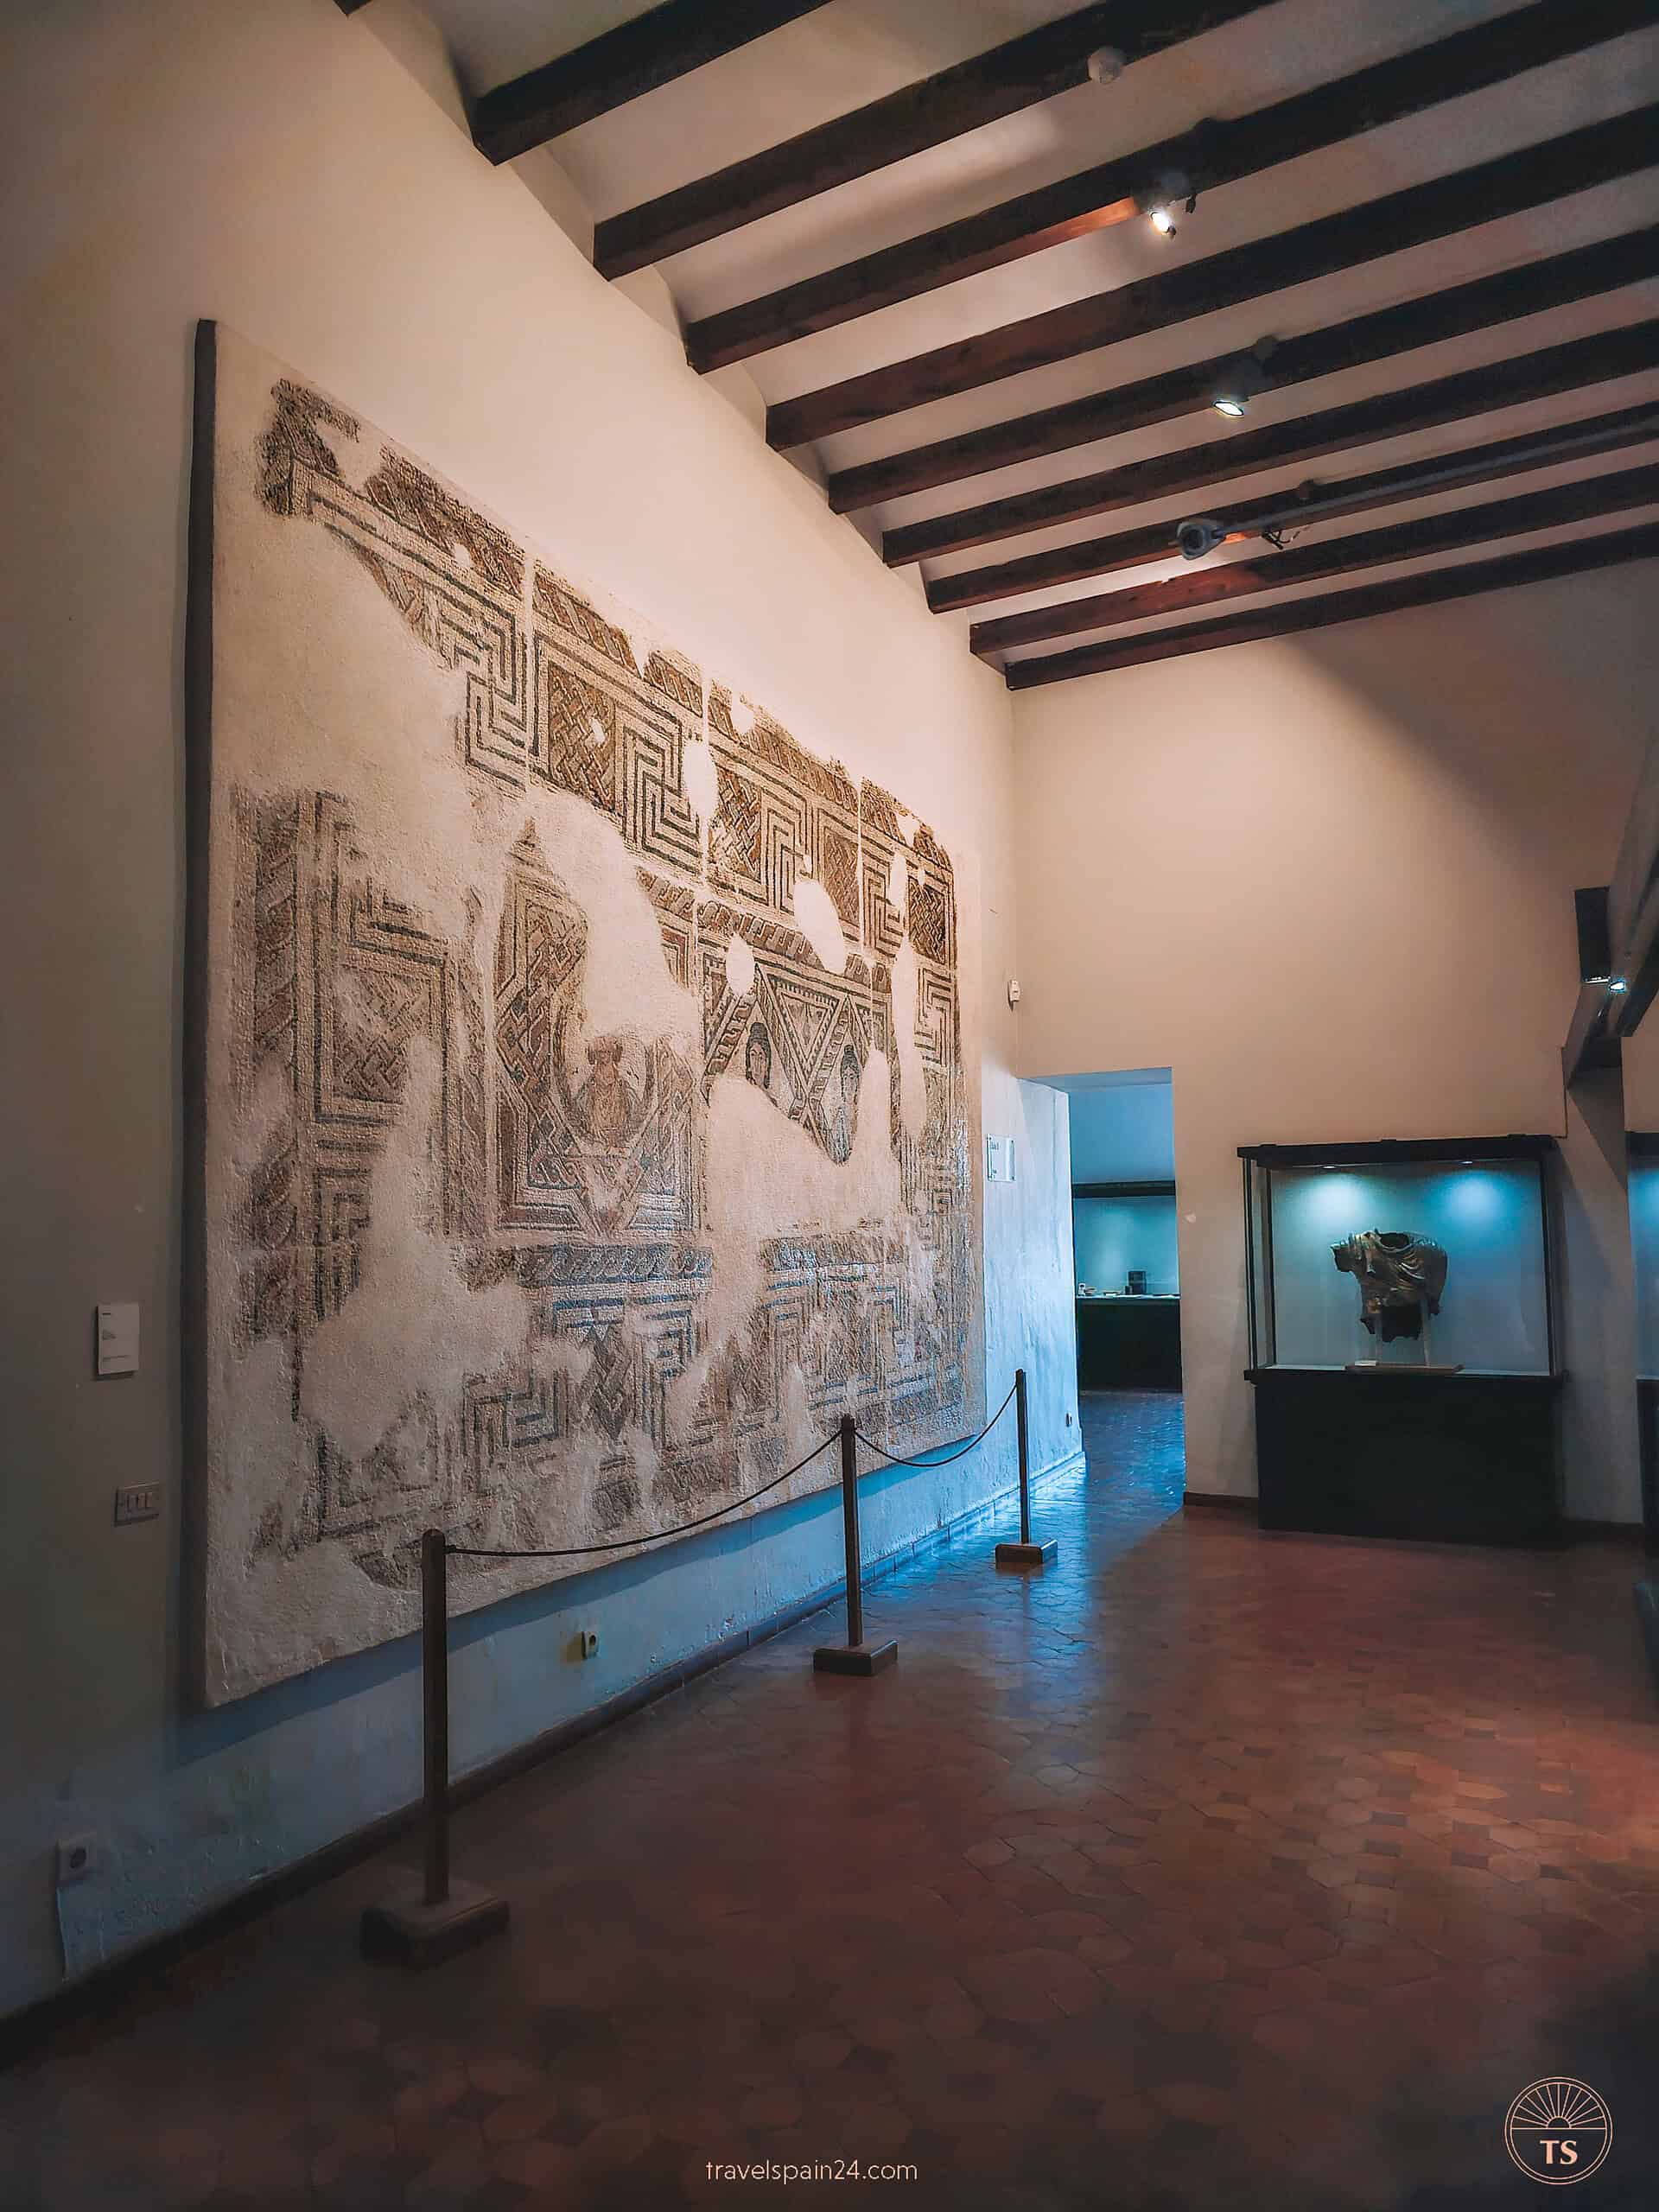 Exhibits inside the Caceres Museum displaying the rich history and culture of Cáceres, providing insights into the city's heritage